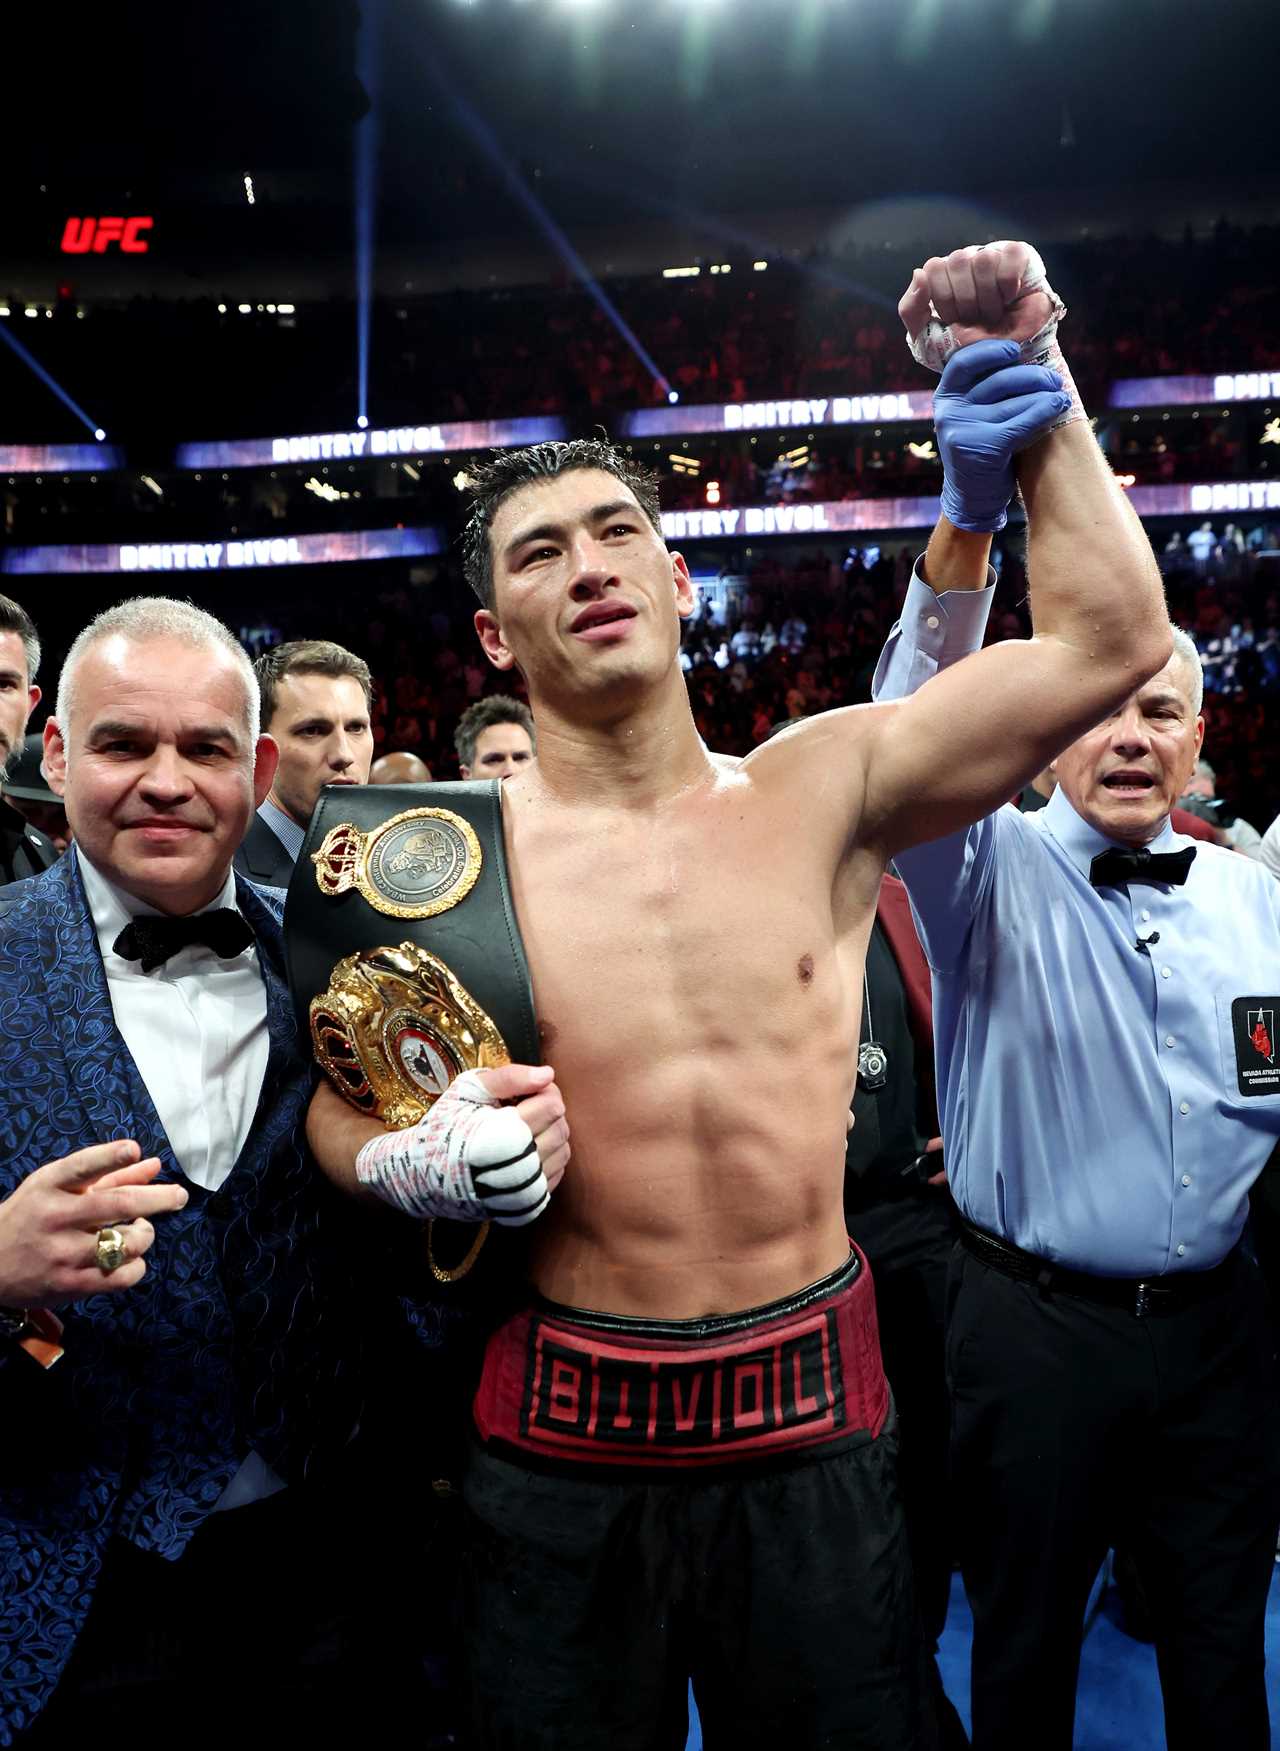 I was treated as the challenger - Dmitry Bivol thrived under Canelo pressure, and wants Smith vs. Beterbiev winner